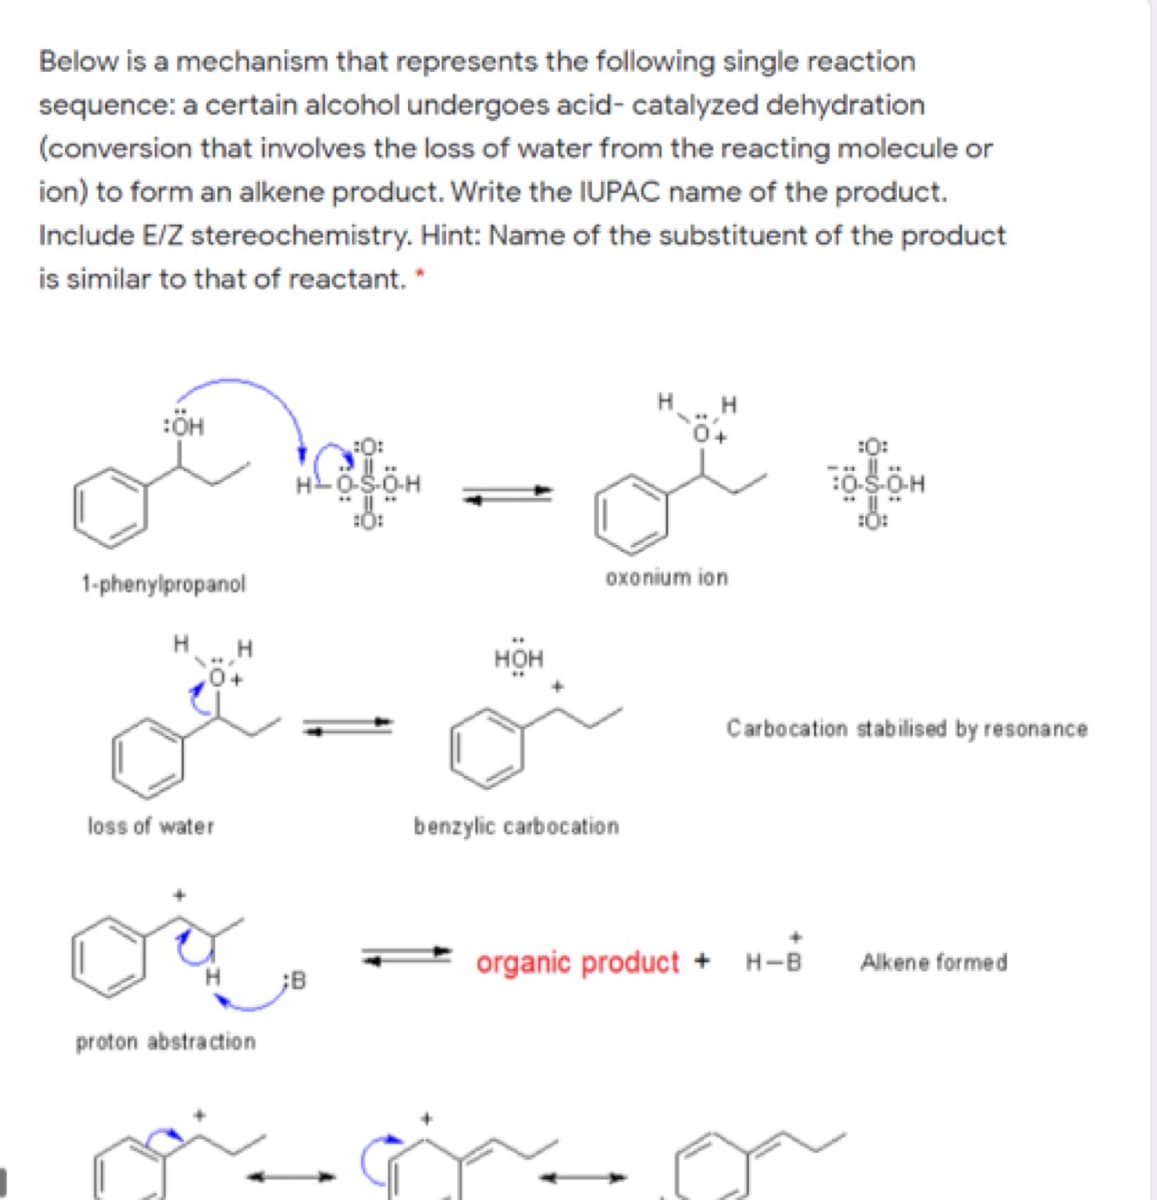 Below is a mechanism that represents the following single reaction
sequence: a certain alcohol undergoes acid- catalyzed dehydration
(conversion that involves the loss of water from the reacting molecule or
ion) to form an alkene product. Write the IUPAC name of the product.
Include E/Z stereochemistry. Hint: Name of the substituent of the product
is similar to that of reactant. *
:ÖH
:O:
:0:
:O:
1-phenylpropanol
oxonium ion
H.
нон
Carbocation stabilised by resonance
loss of water
benzylic carbocation
organic product + H-B
Alkene formed
;B
proton abstraction
